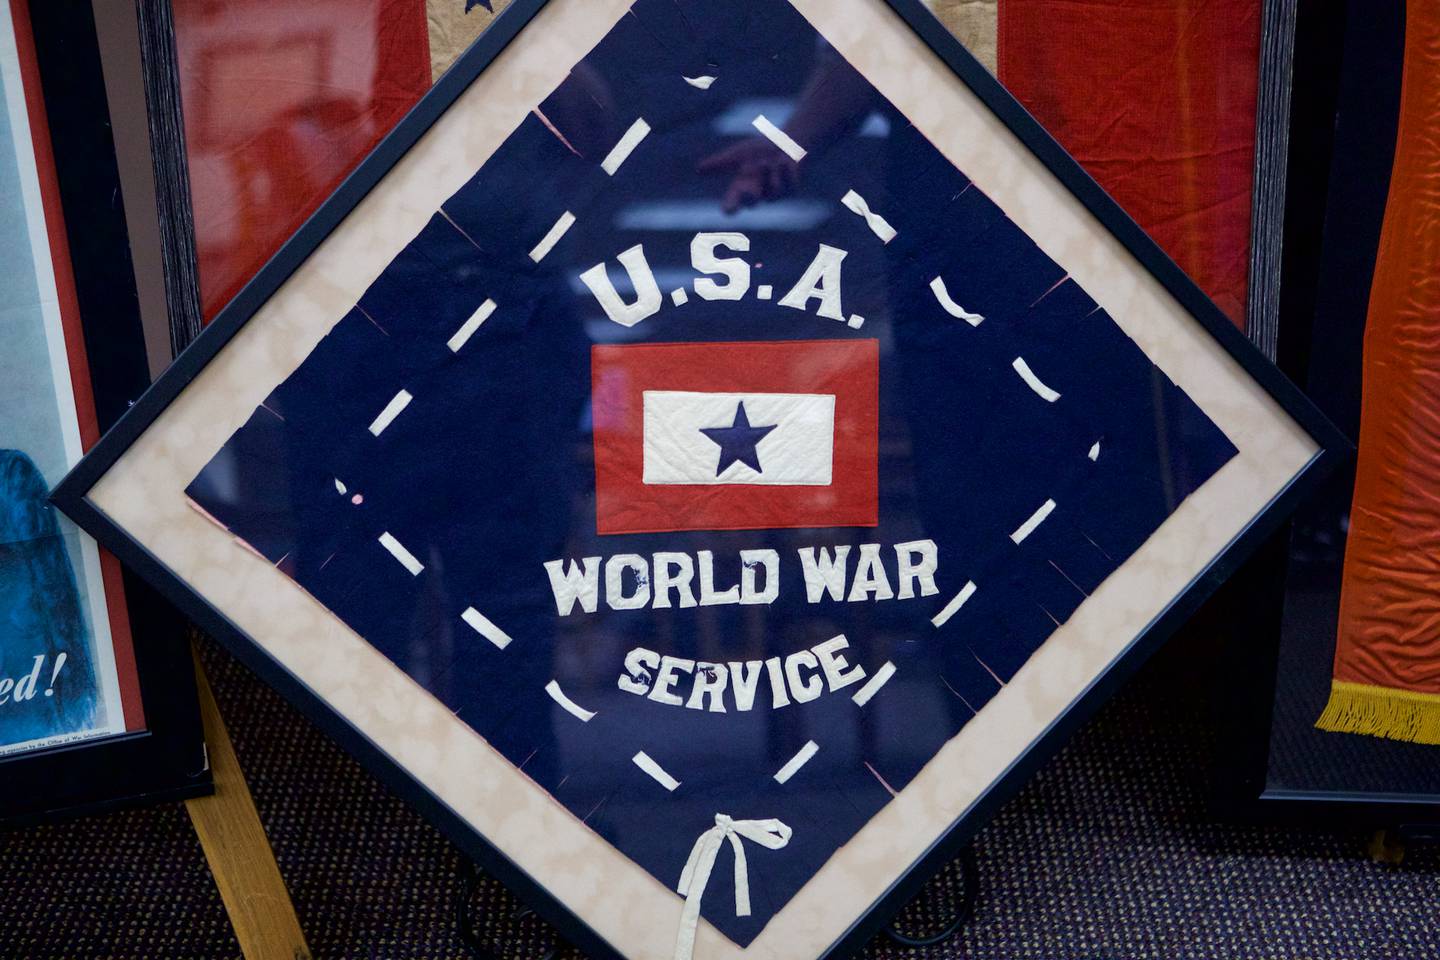 One of the service flags from the Mark Hutson collection on display at the Woodstock Public Library. A portion of the collection remains on display there through June 3, 2022.